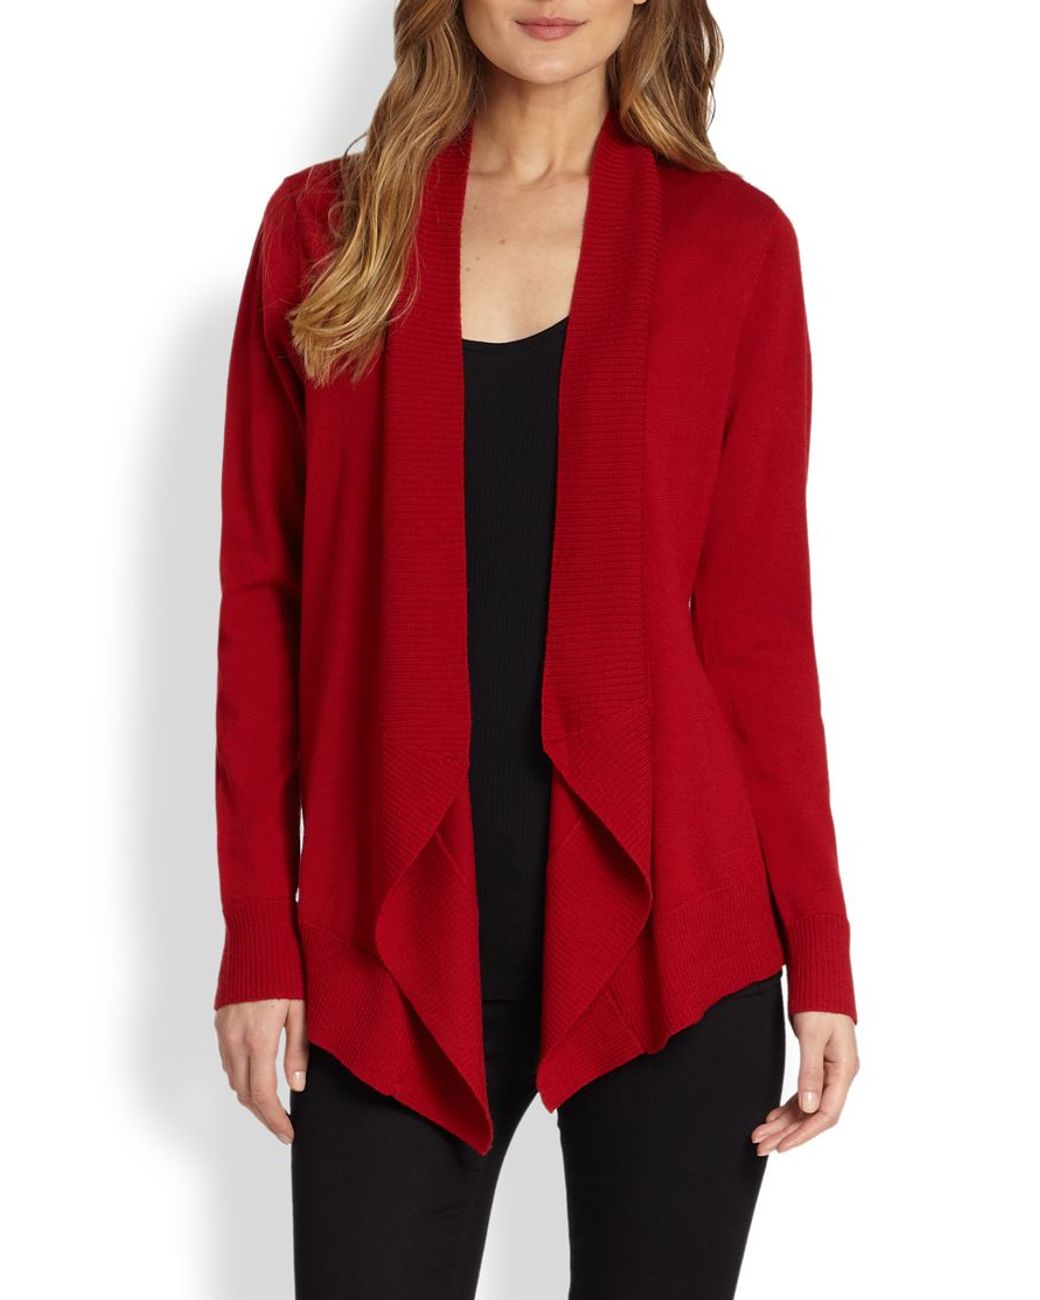 Eileen Fisher Merino Jersey Angled Open Cardigan in Red | Lyst